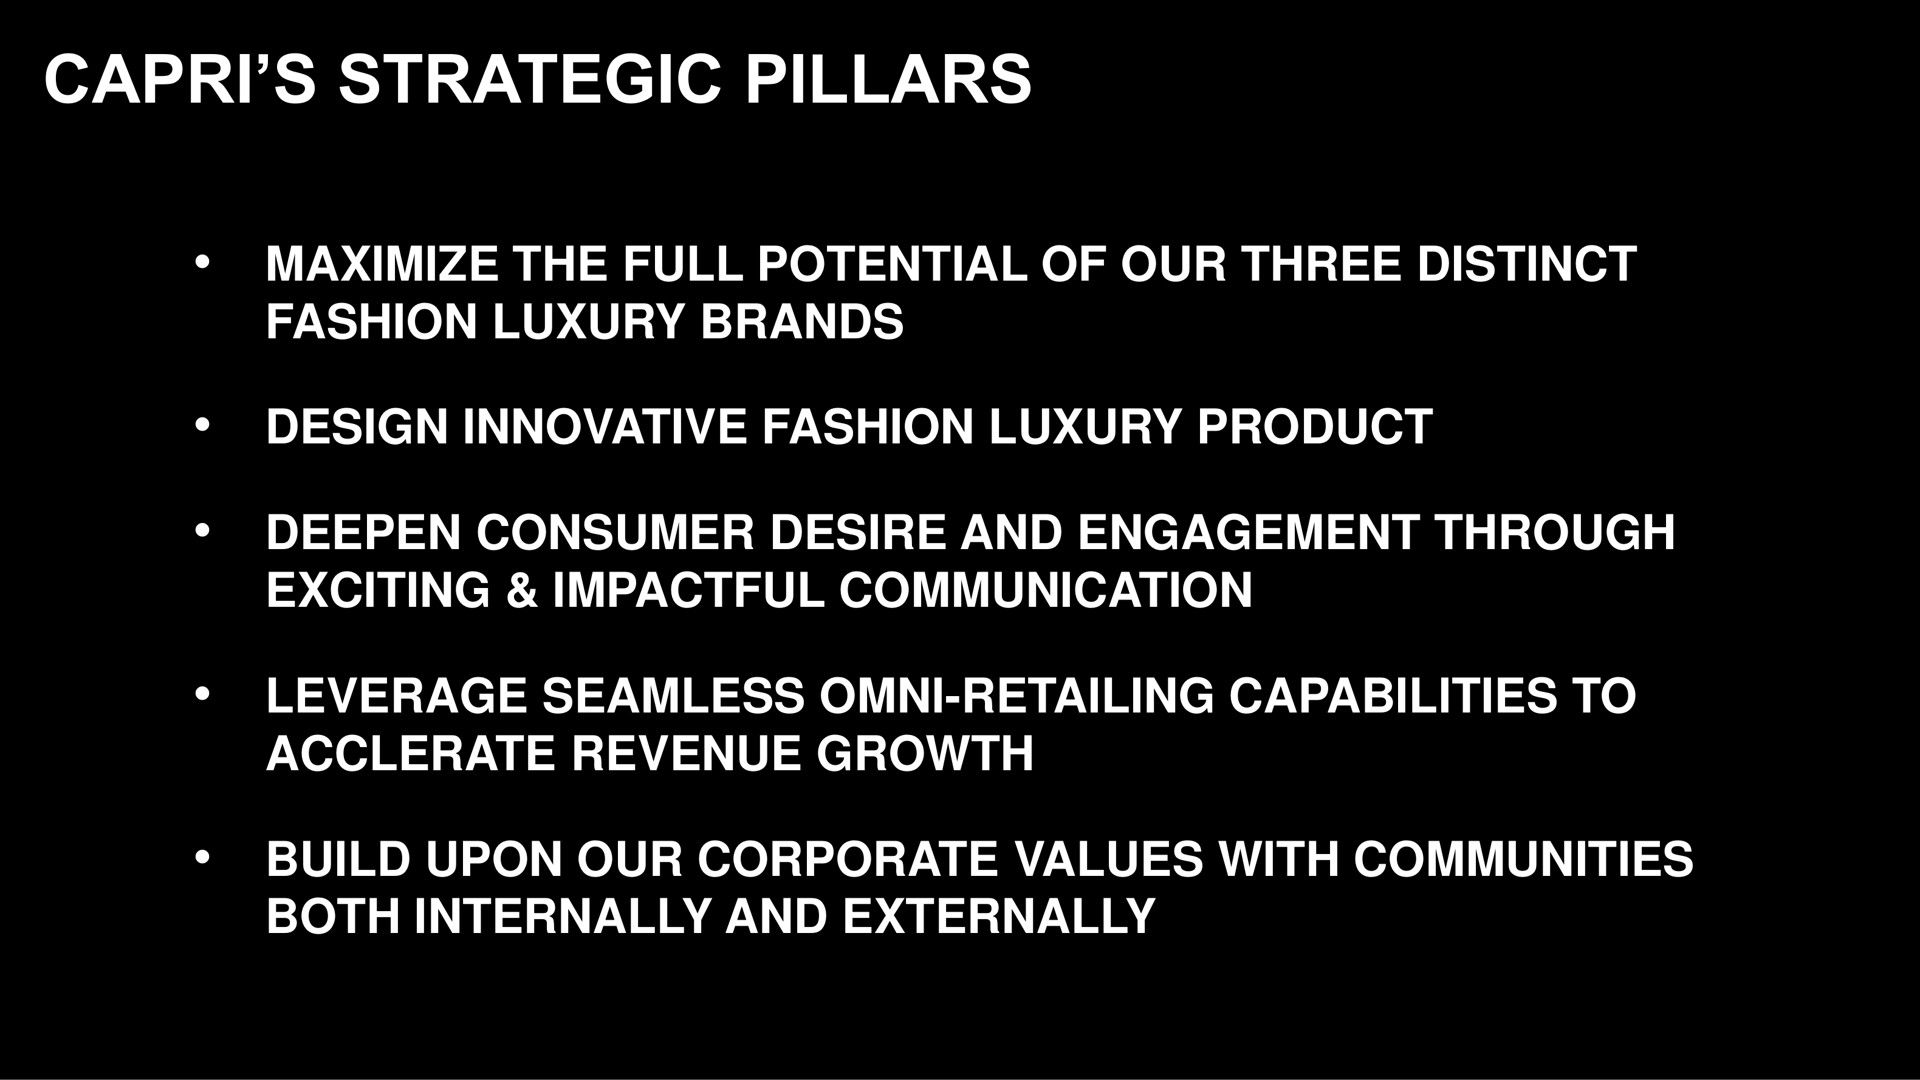 strategic pillars maximize the full potential of our three distinct fashion luxury brands design innovative fashion luxury product deepen consumer desire and engagement through exciting communication leverage seamless retailing capabilities to revenue growth build upon our corporate values with communities both internally and externally | Capri Holdings